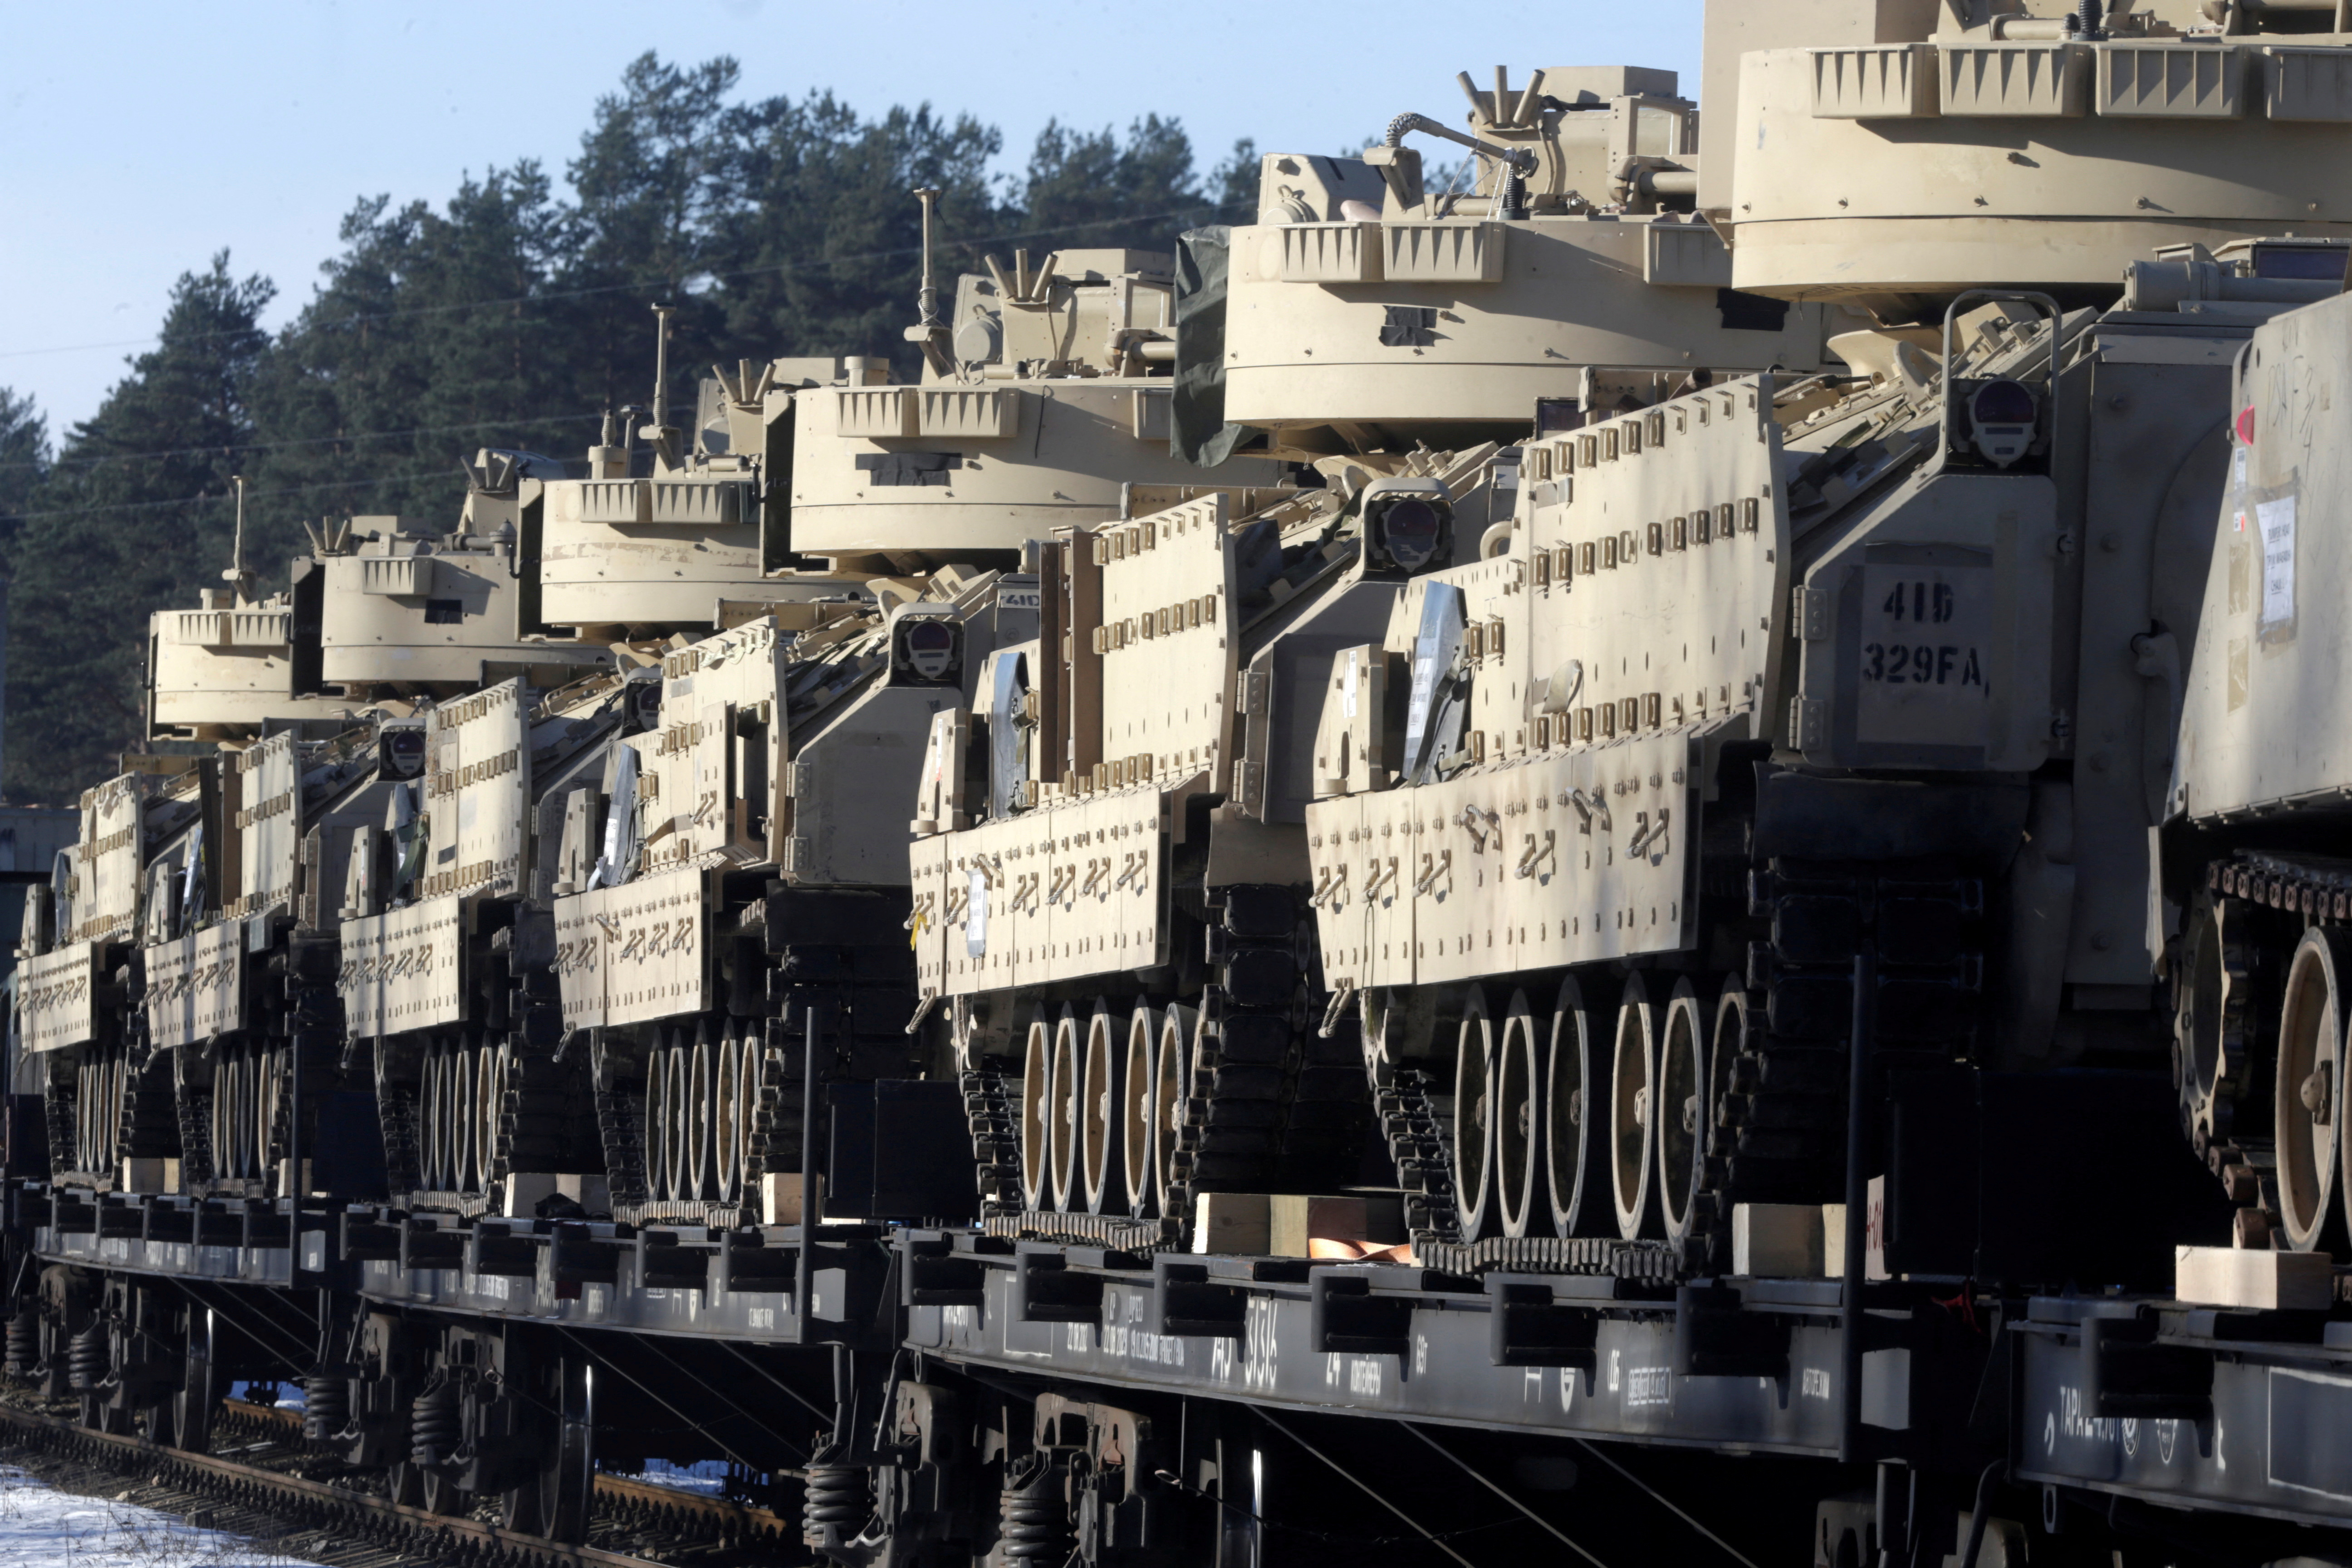 U.S. Bradley fighting vehicles that will be deployed in Latvia for NATO's Operation Atlantic Resolve wait for an unload in Garkalne